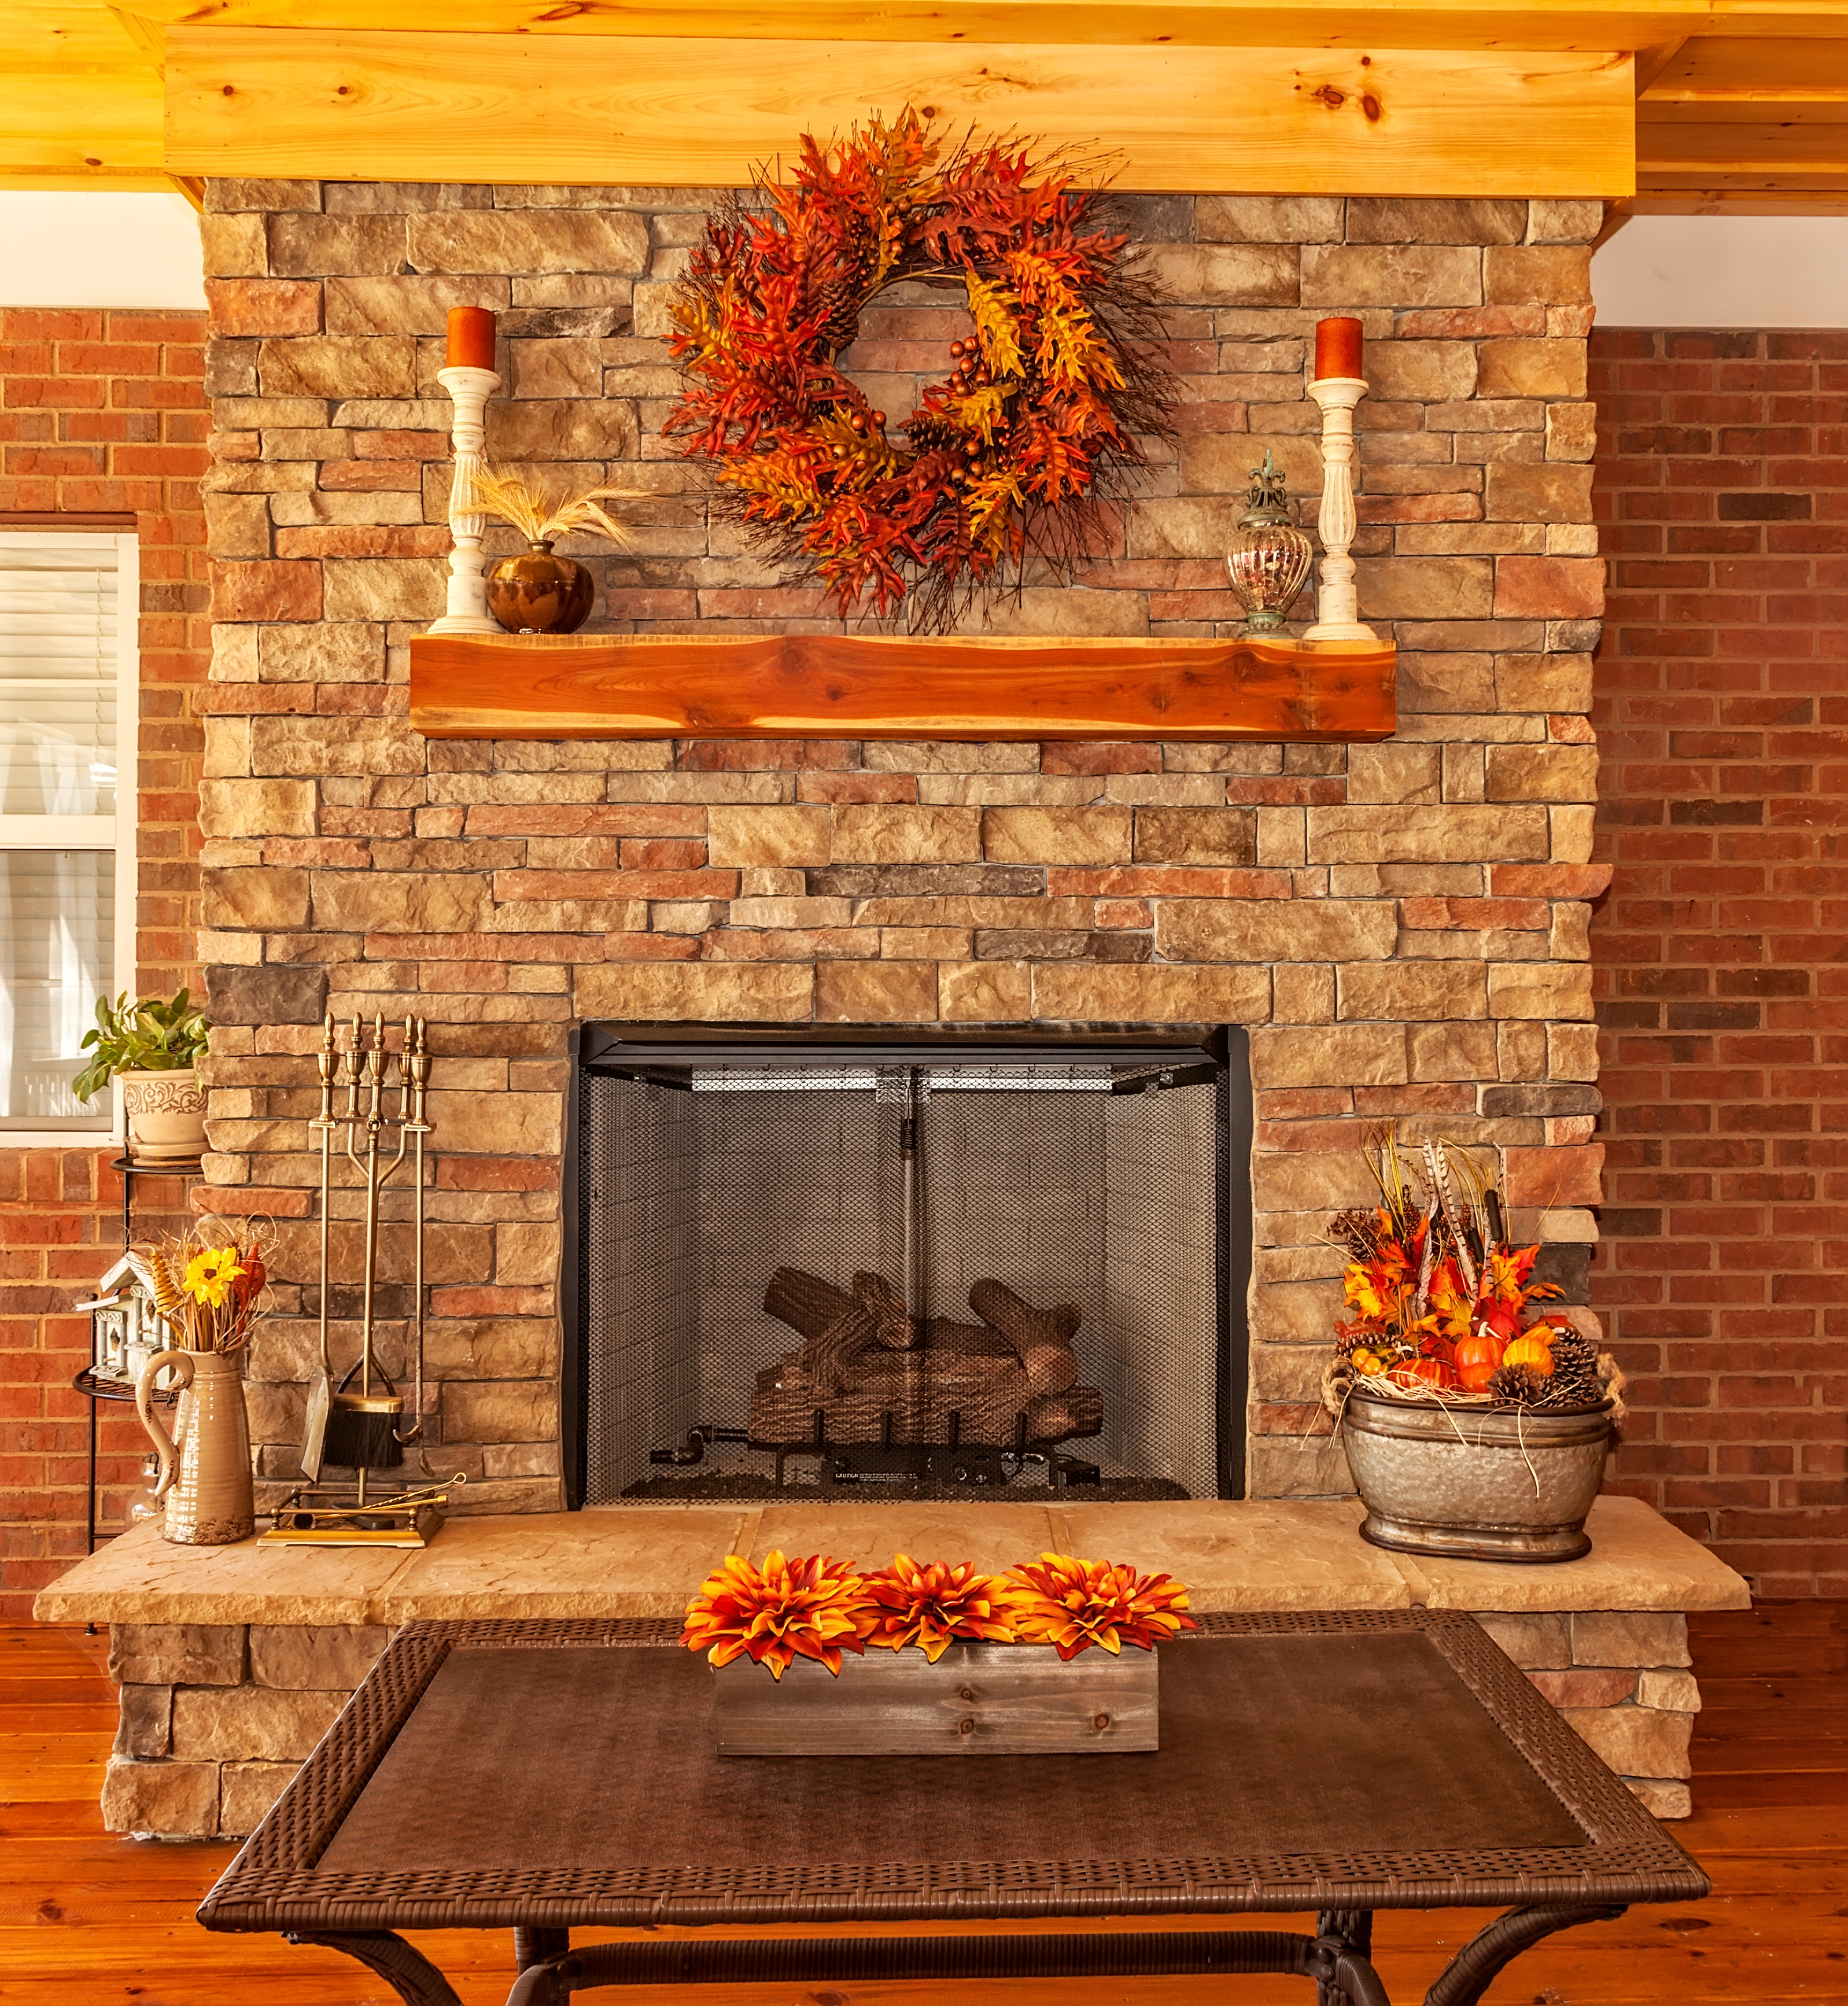 5 Fall Mantel Decorating Ideas That'll Make You Look Like a Pro 9